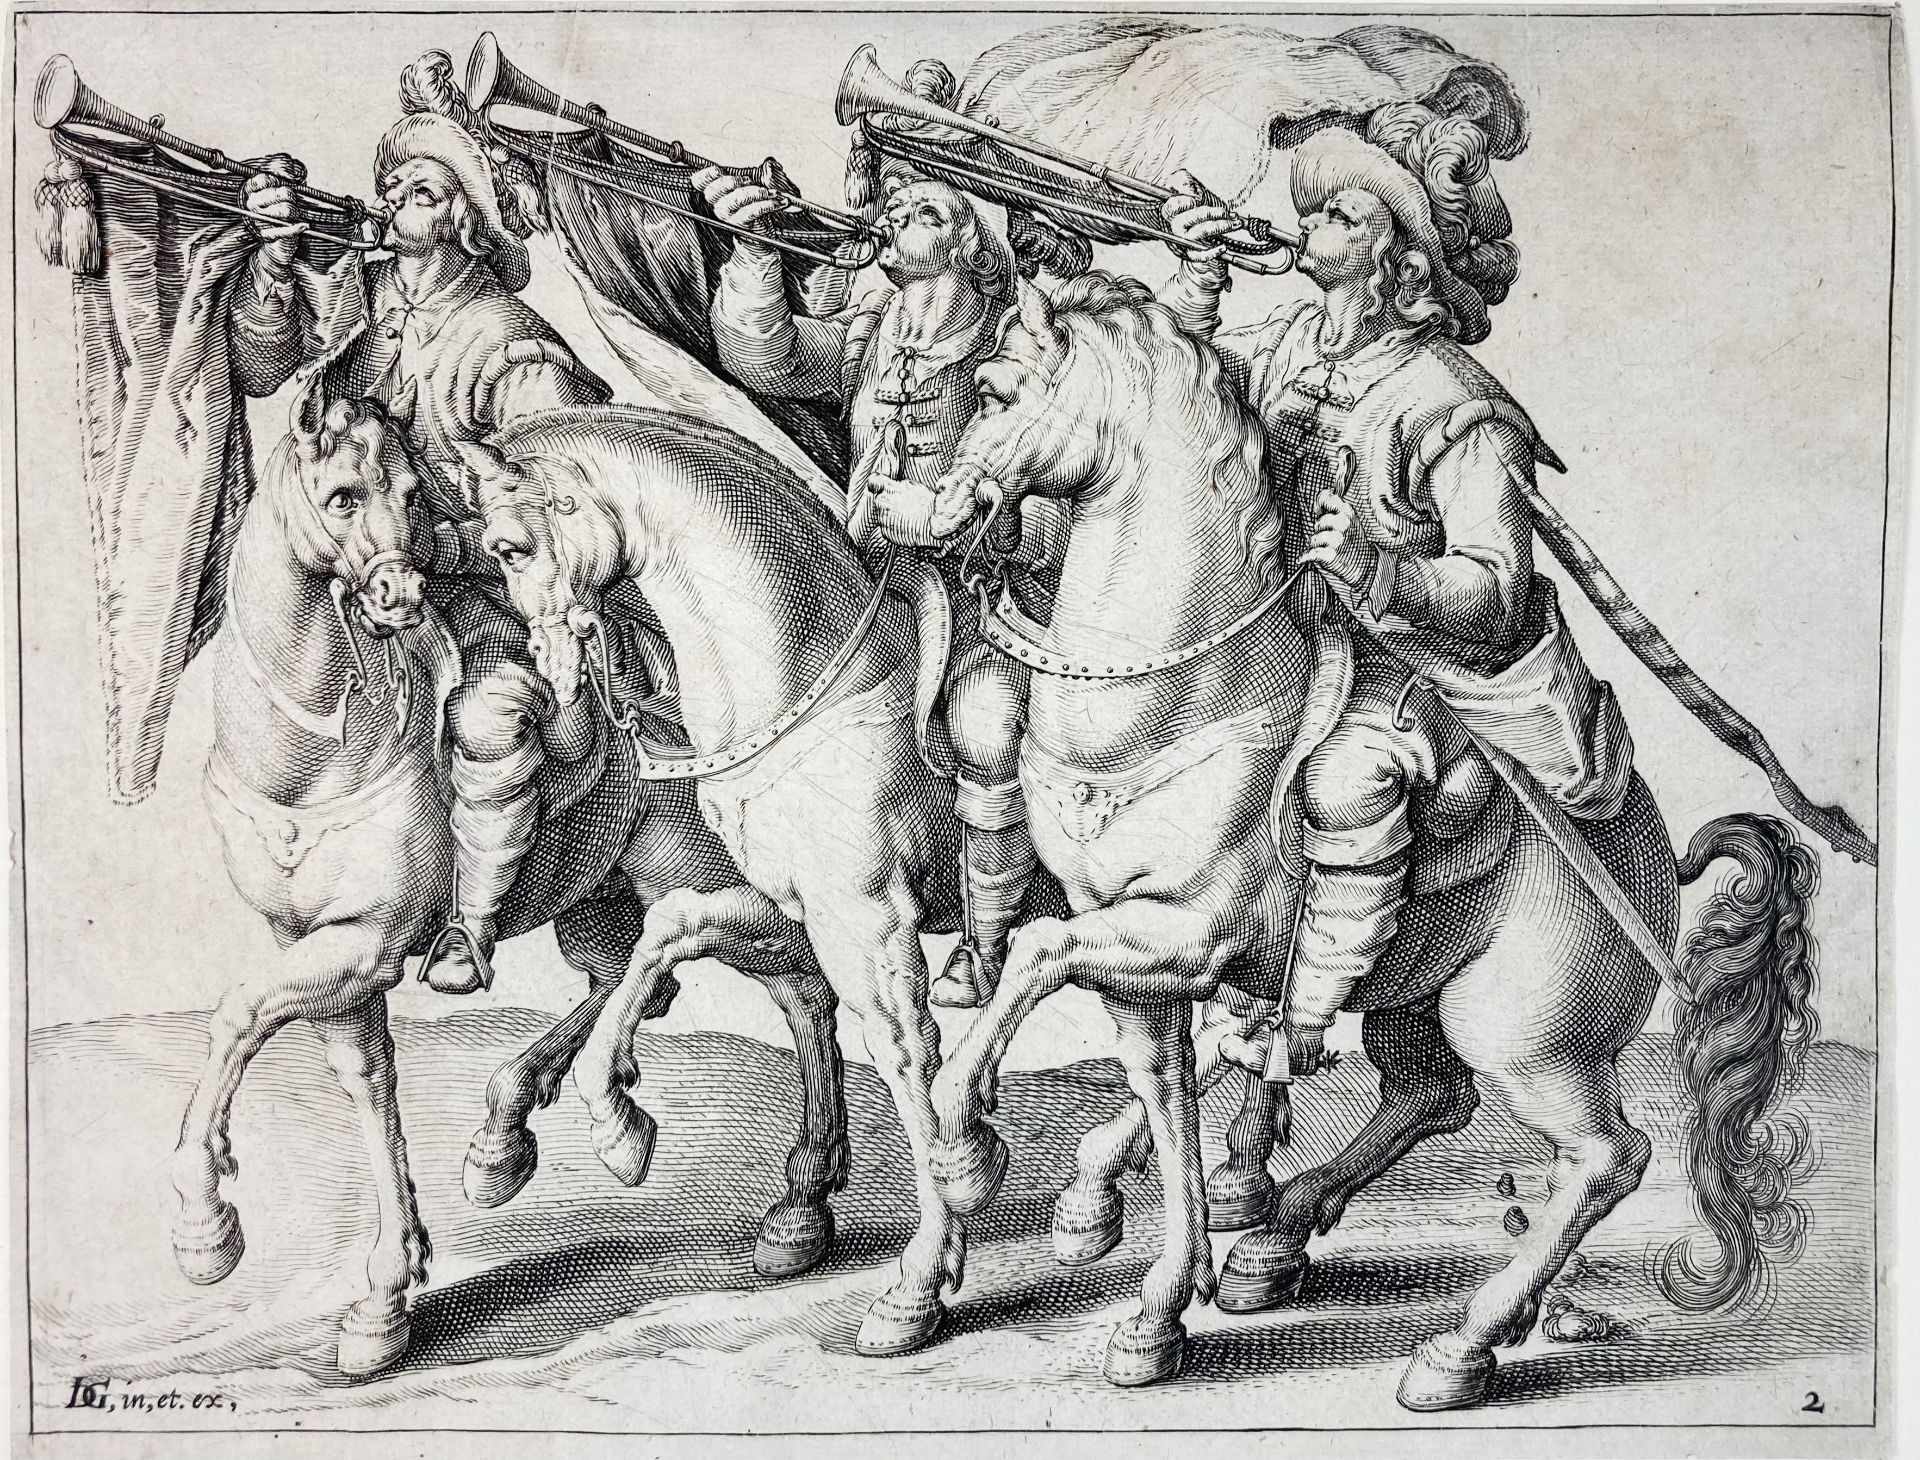 GHEYN, Jacques de II, workshop of. "The three mounted trumpet players". (1599